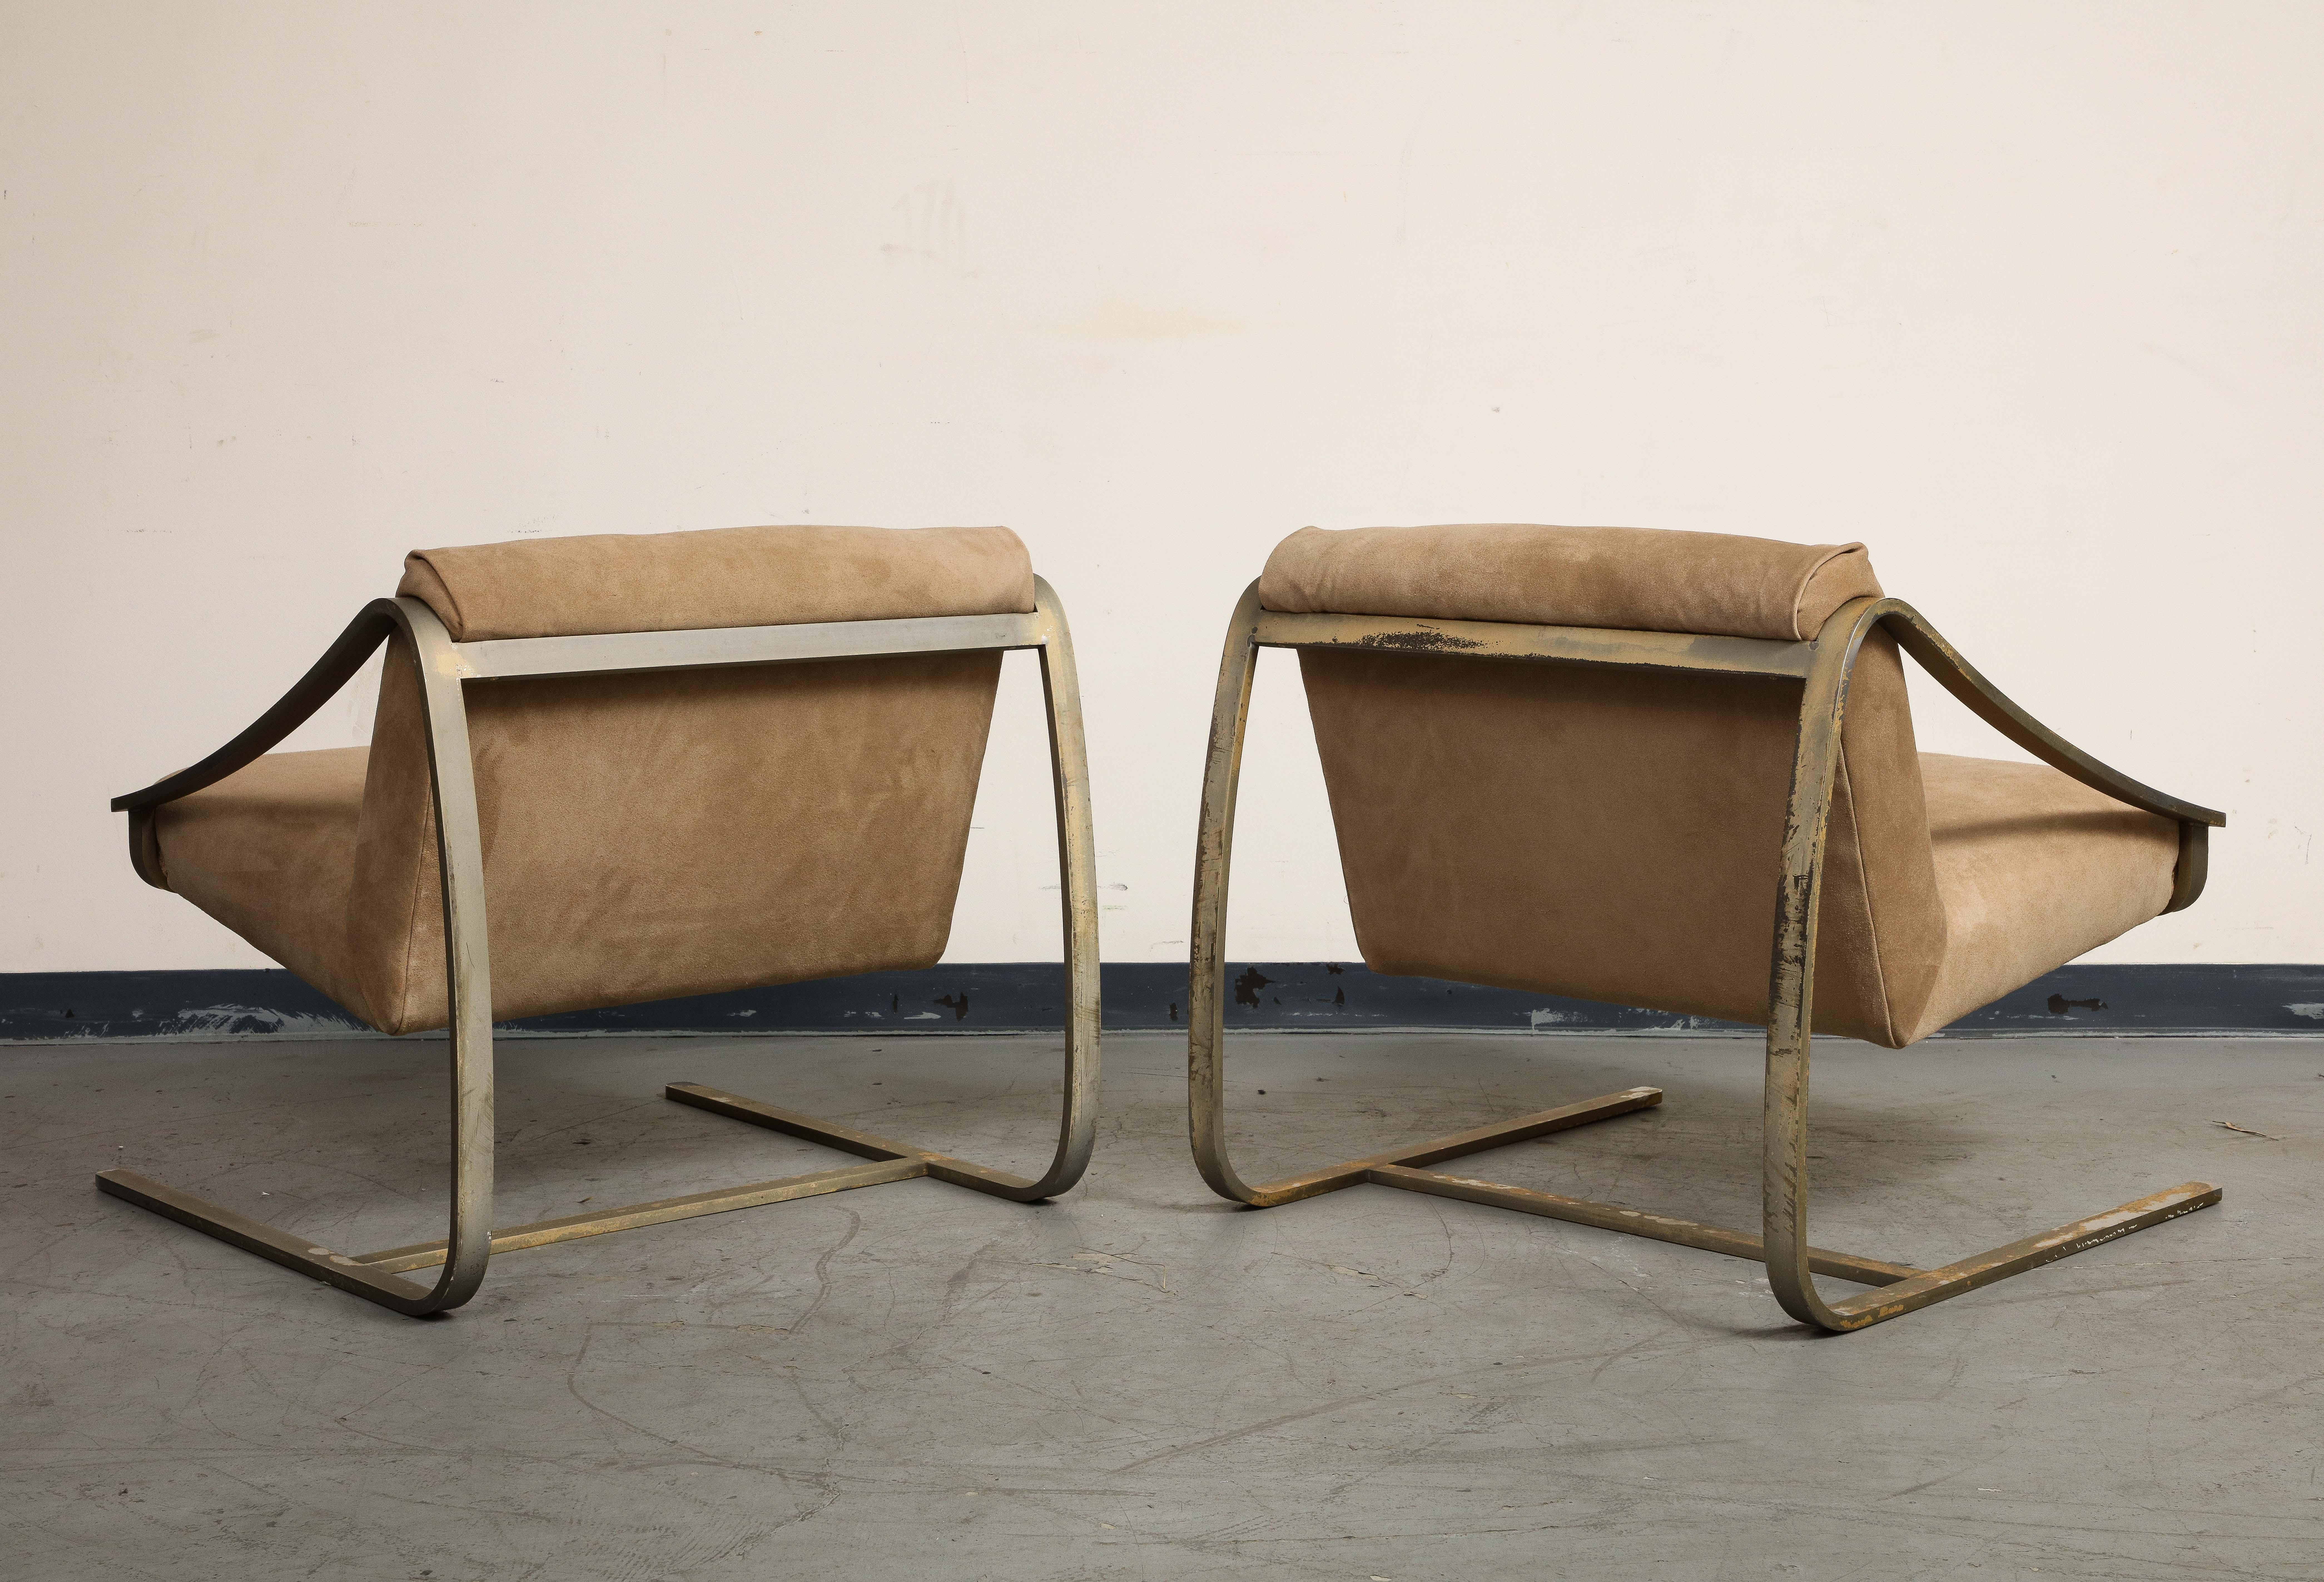 Pair of Bronze and Suede Modernist Lounge Chairs, circa 1965 For Sale 4